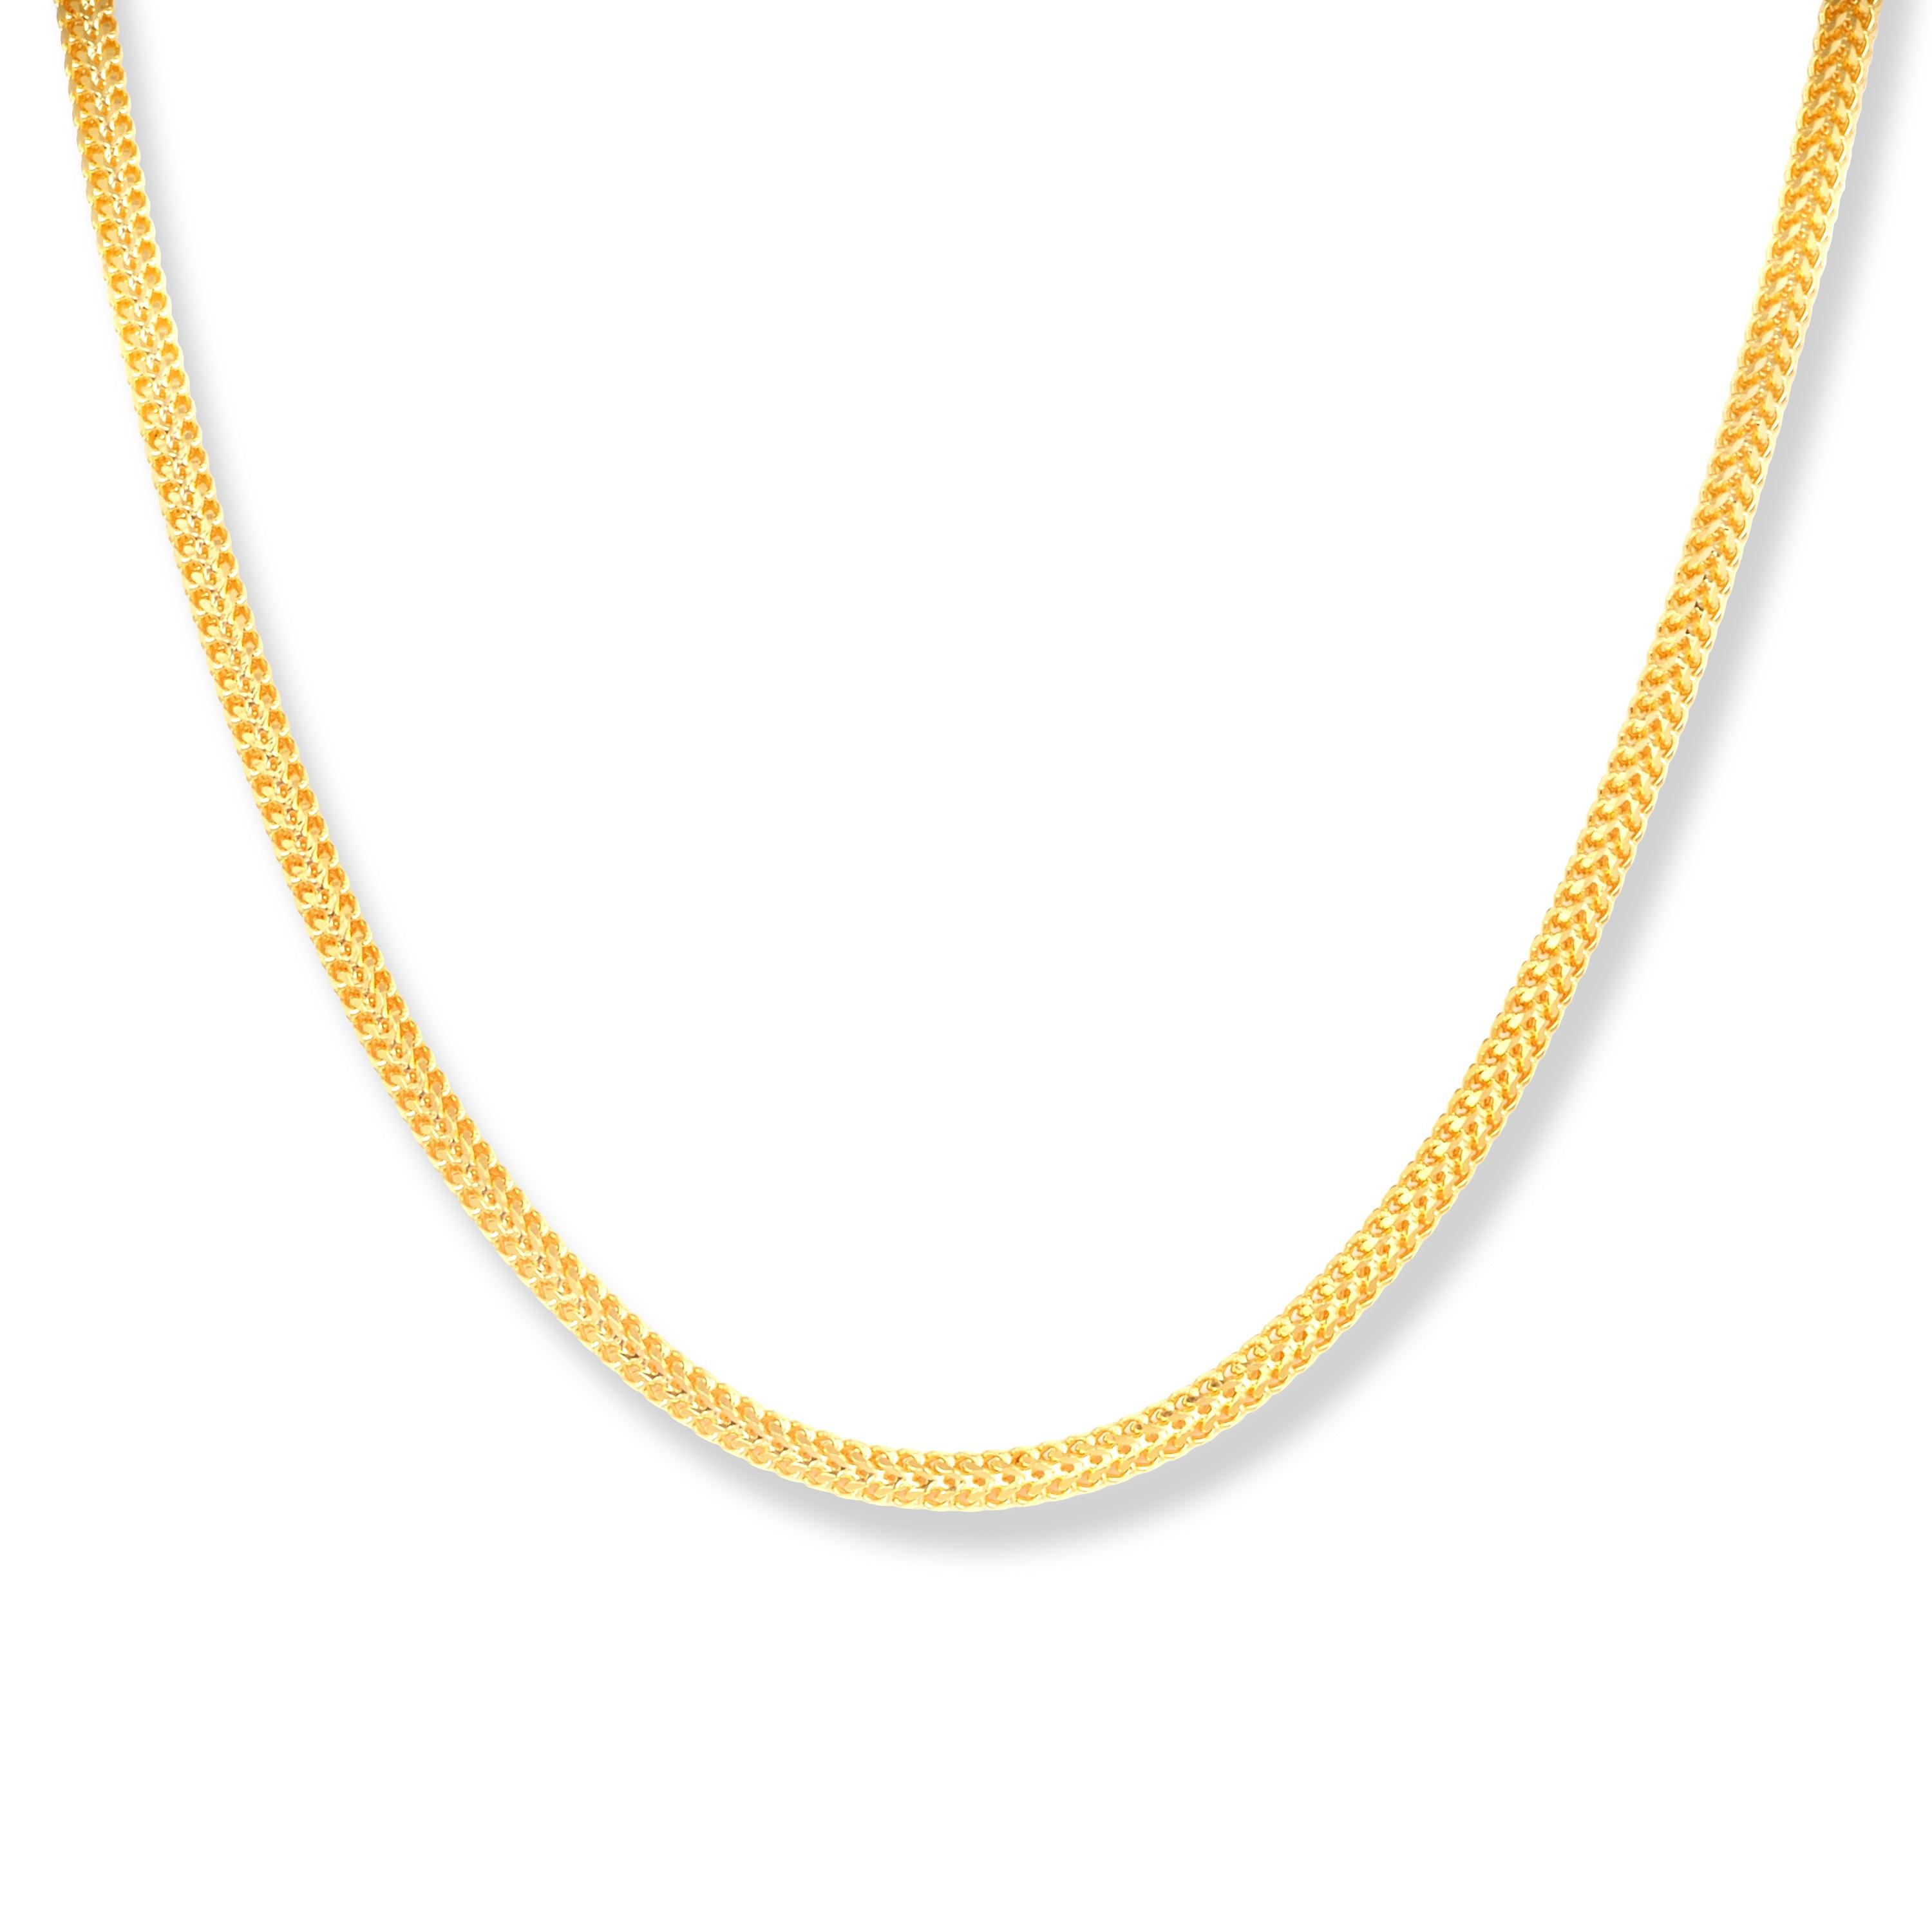 22ct Gold Round Foxtail Chain with Lobster Clasp C-7138 - Minar Jewellers